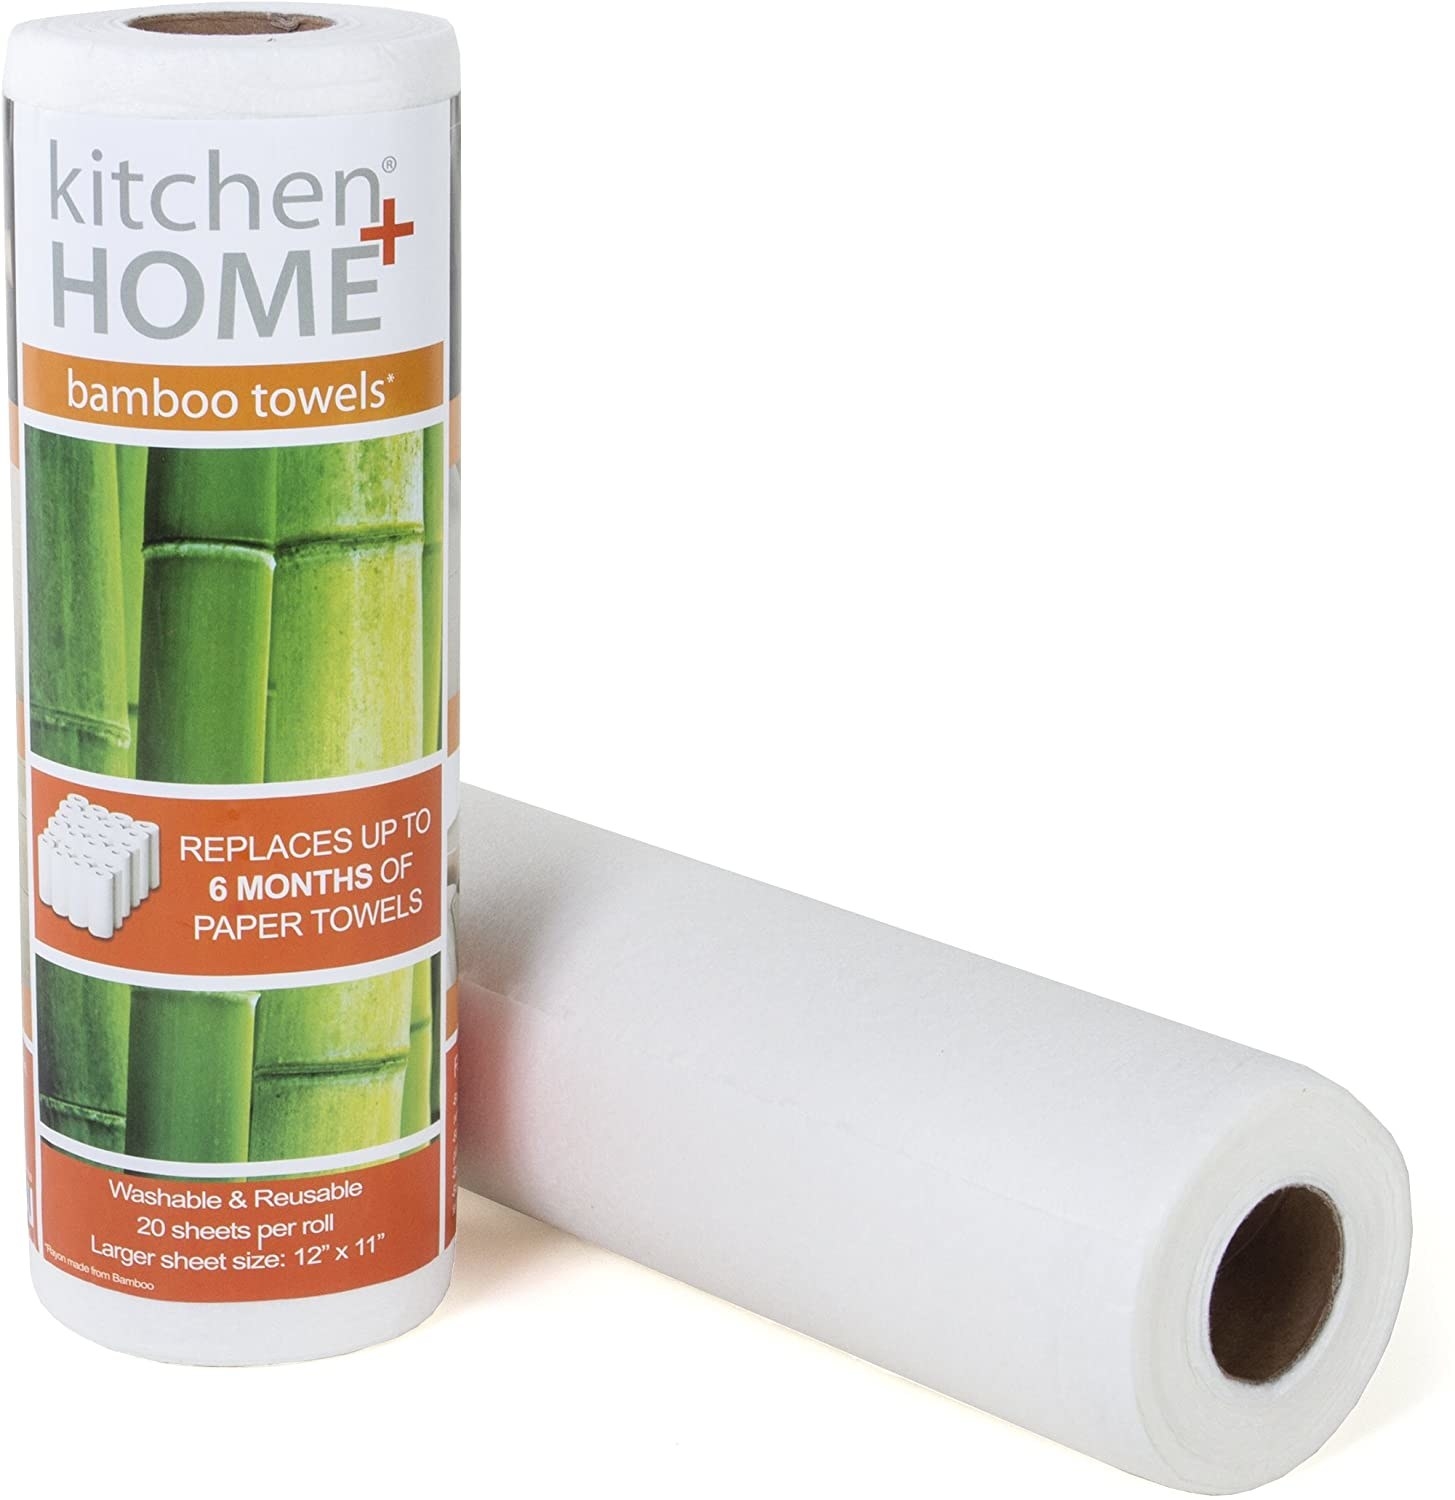 Product photo showing outside packaging as well as roll of bamboo towels 